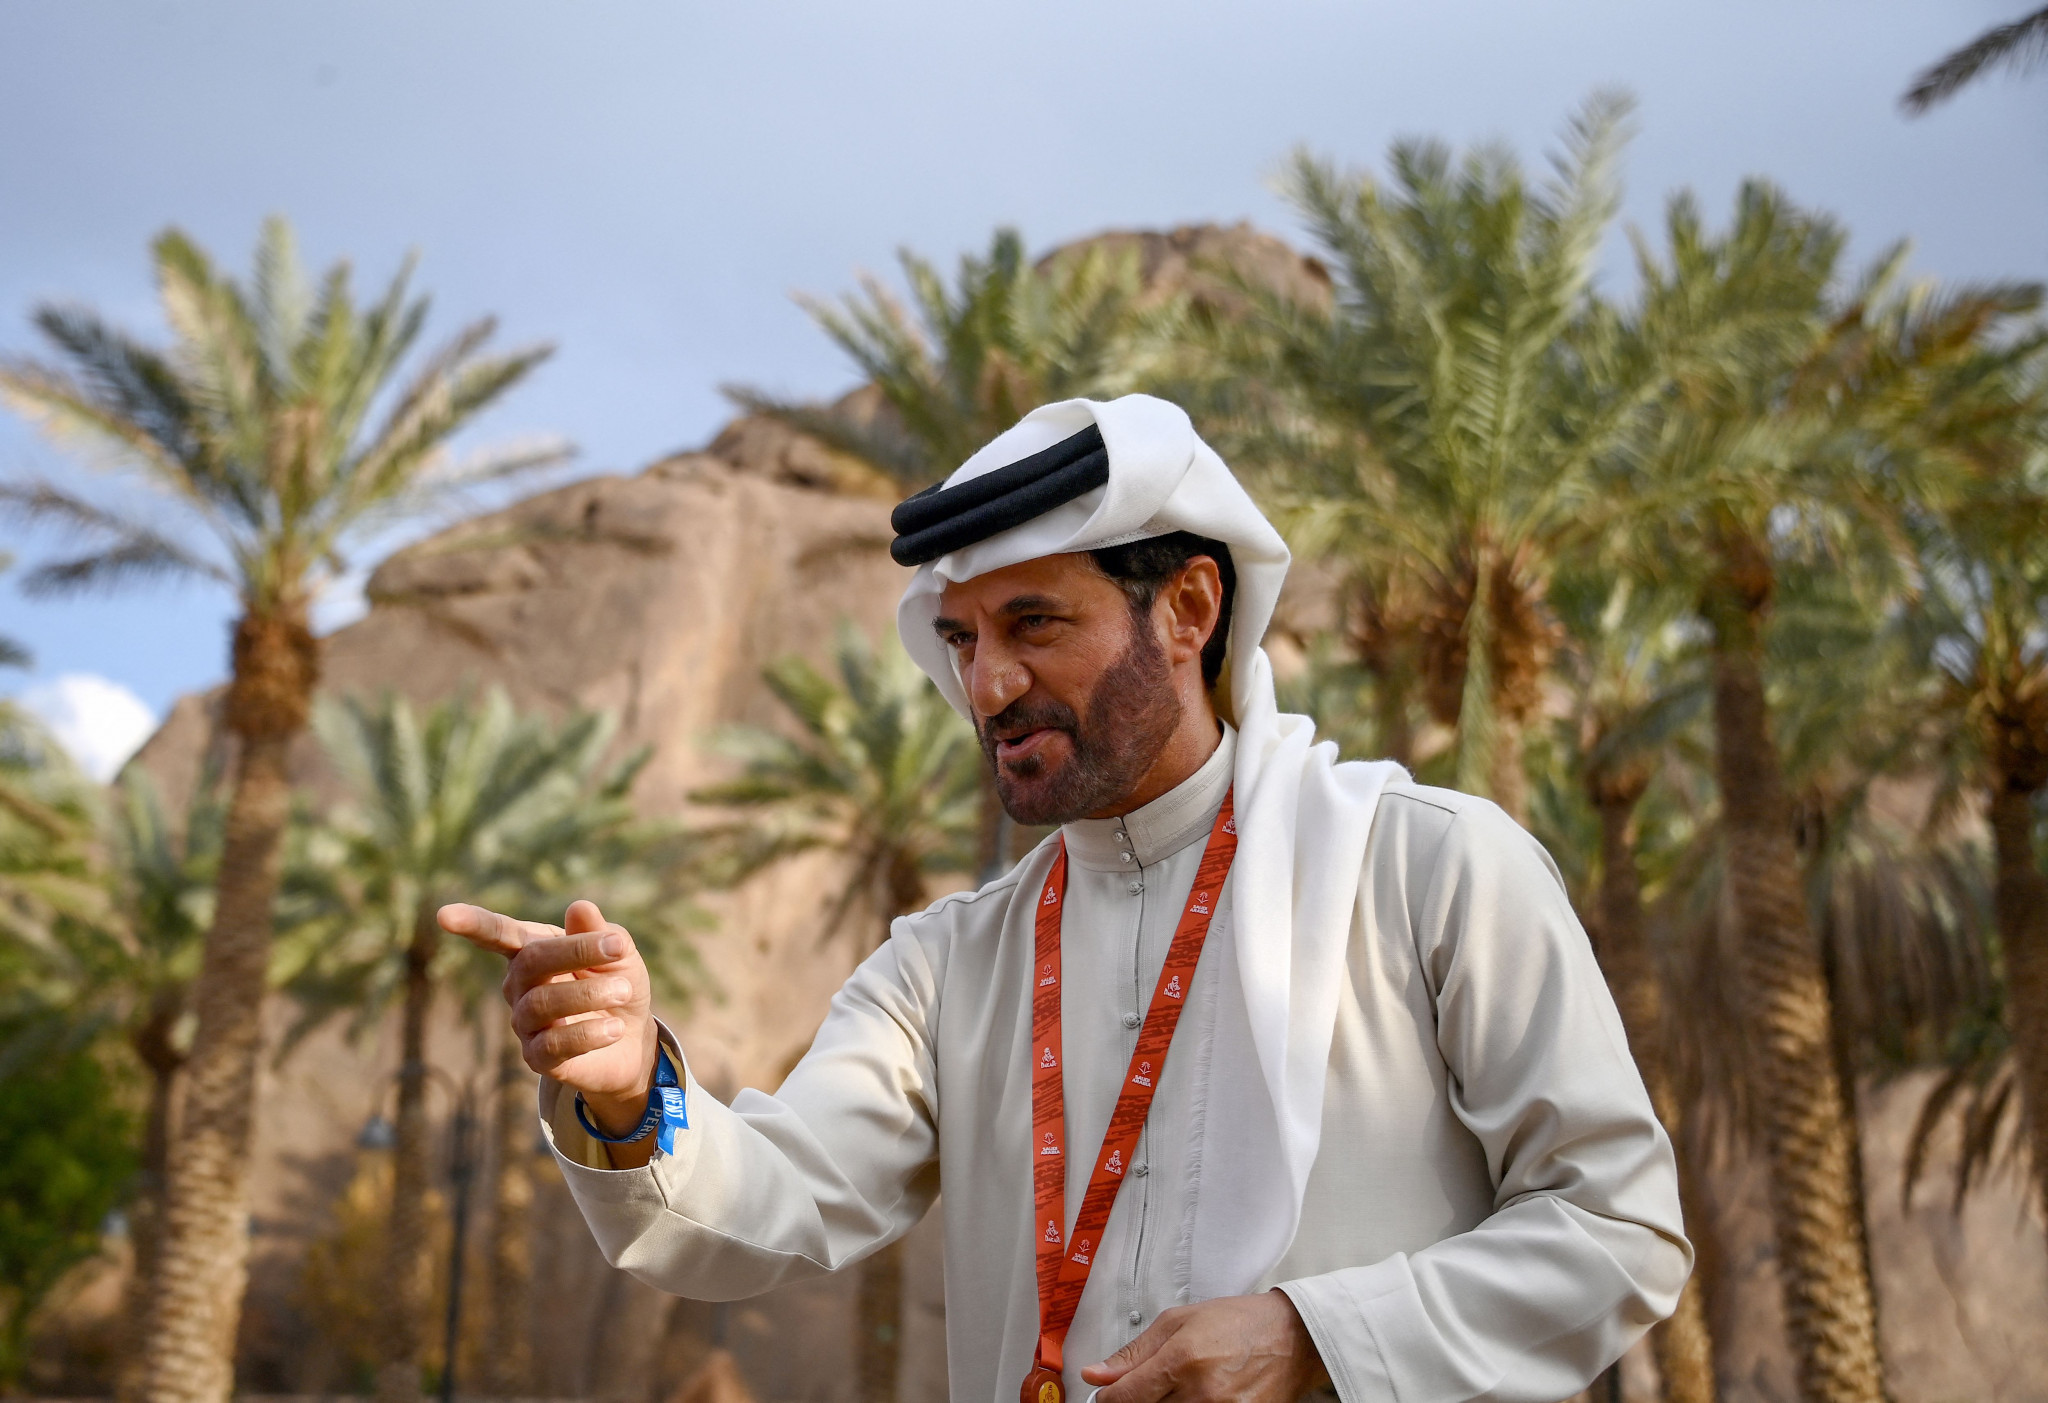 Governance reforms have been introduced at the FIA since Mohammed Ben Sulayem of the United Arab Emirates was elected as President last year ©Getty Images